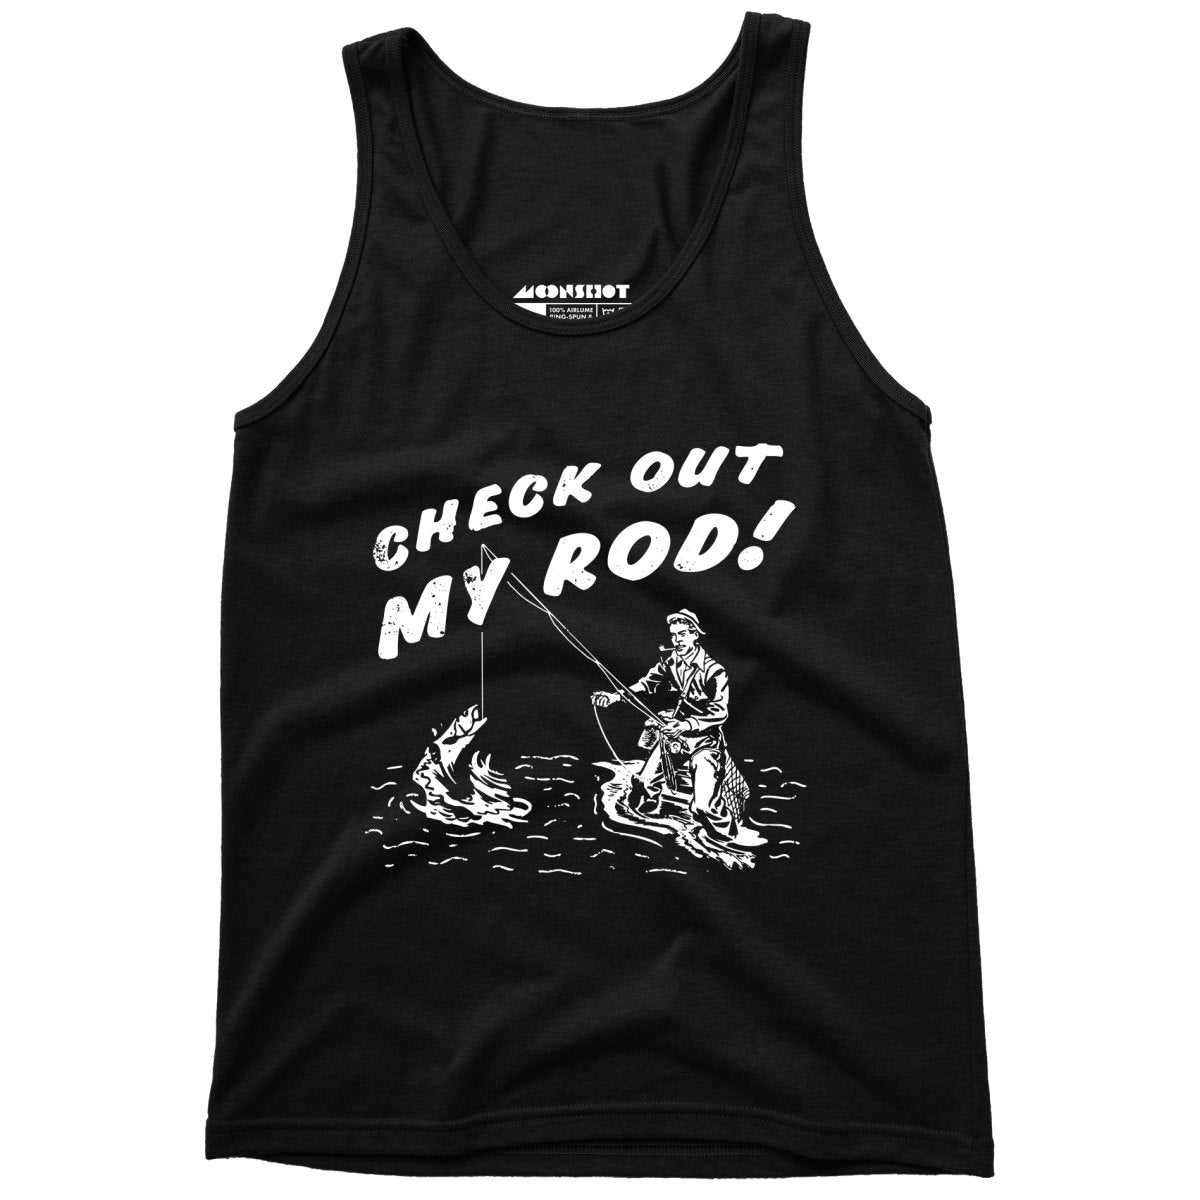 Check Out My Rod - Unisex Tank Top